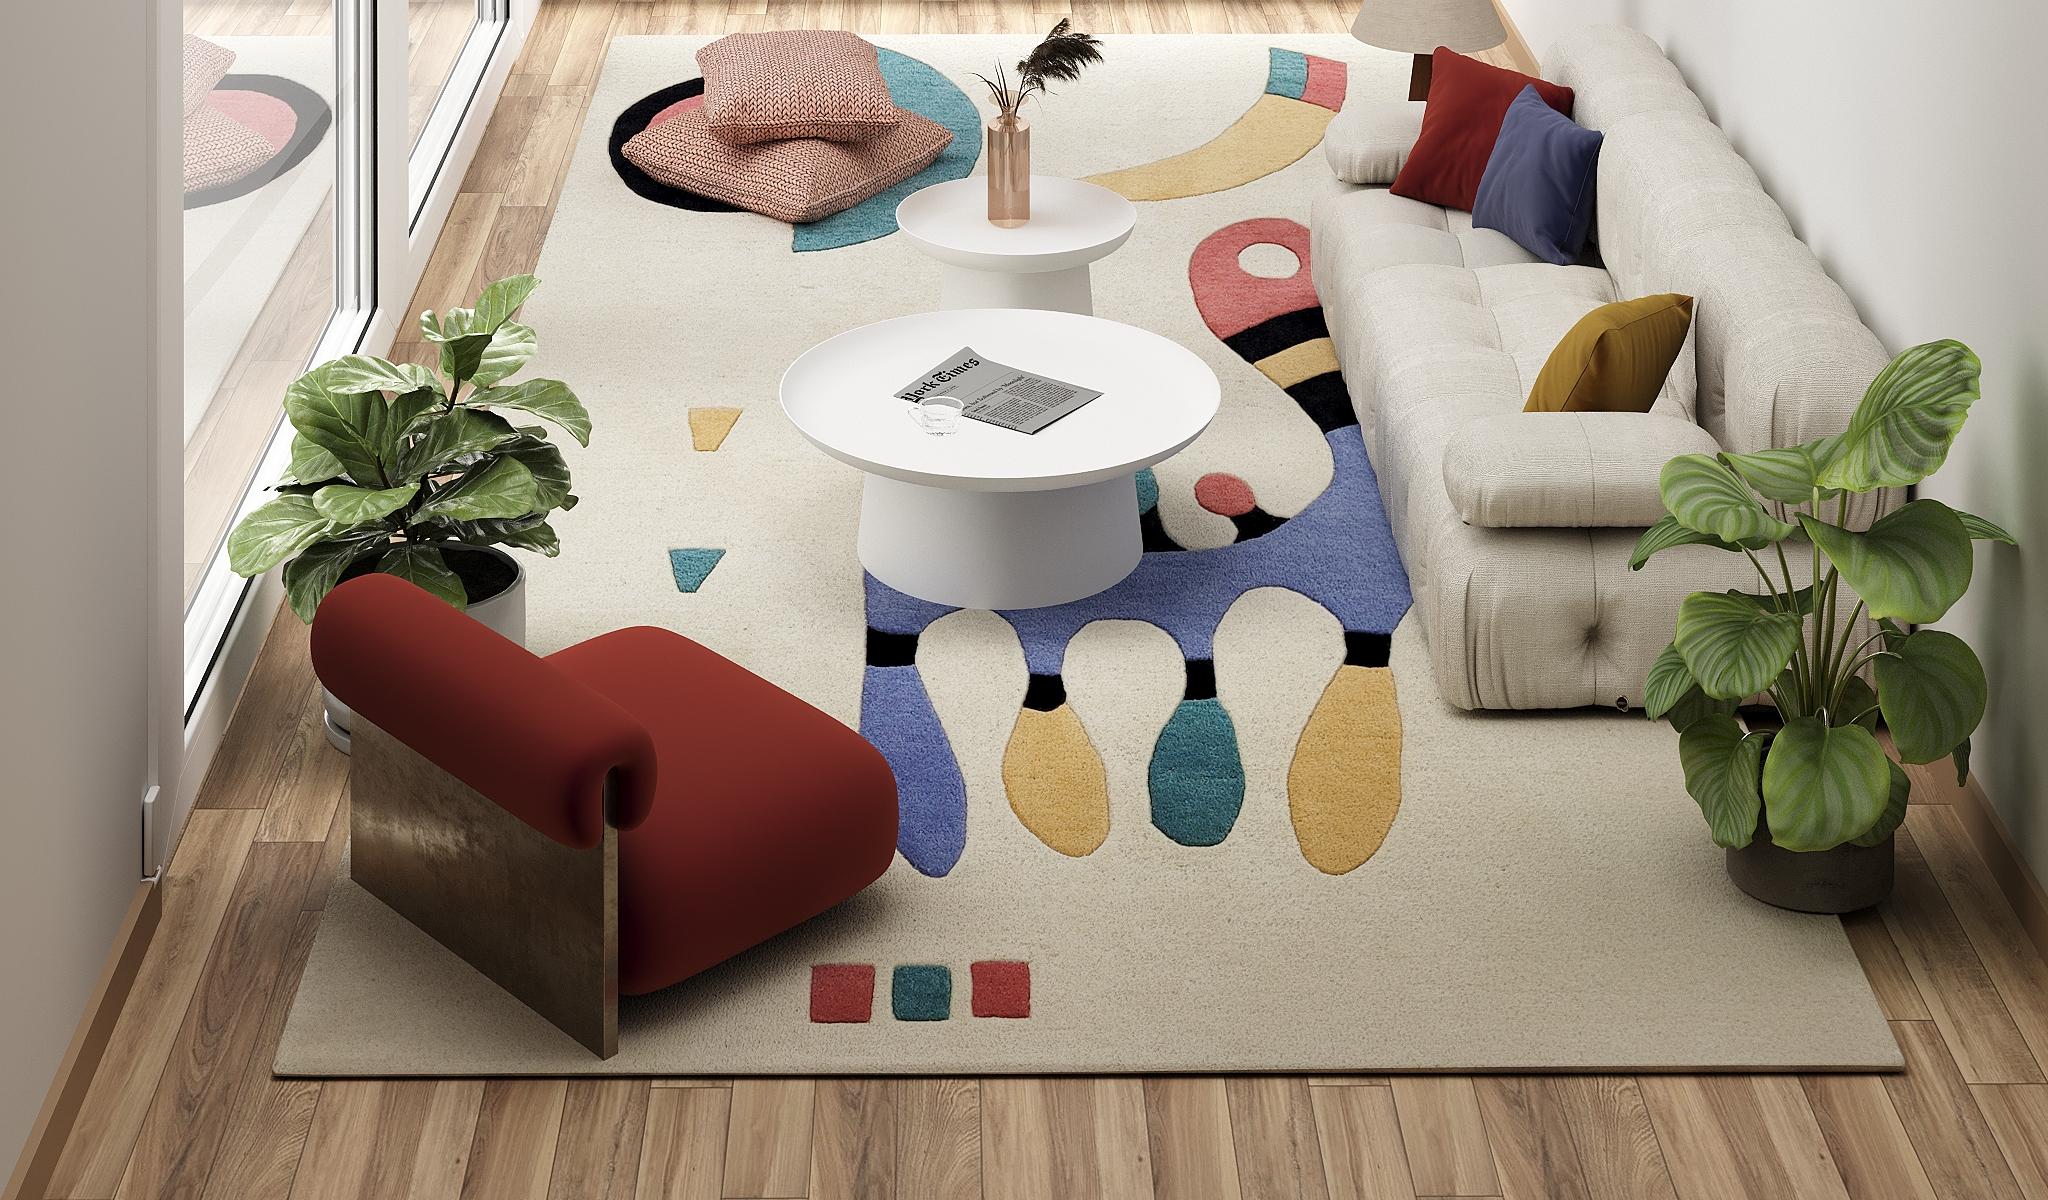 Custom hand tufted rug based on the artwork “Composition”, painted by Wassily Kandinsky in 1944.

Sustainable and certified fair-trade artisanal production. Label Step fair-trade partners. 

Colors: 6 custom-dyed colors. Main colors in the rug: